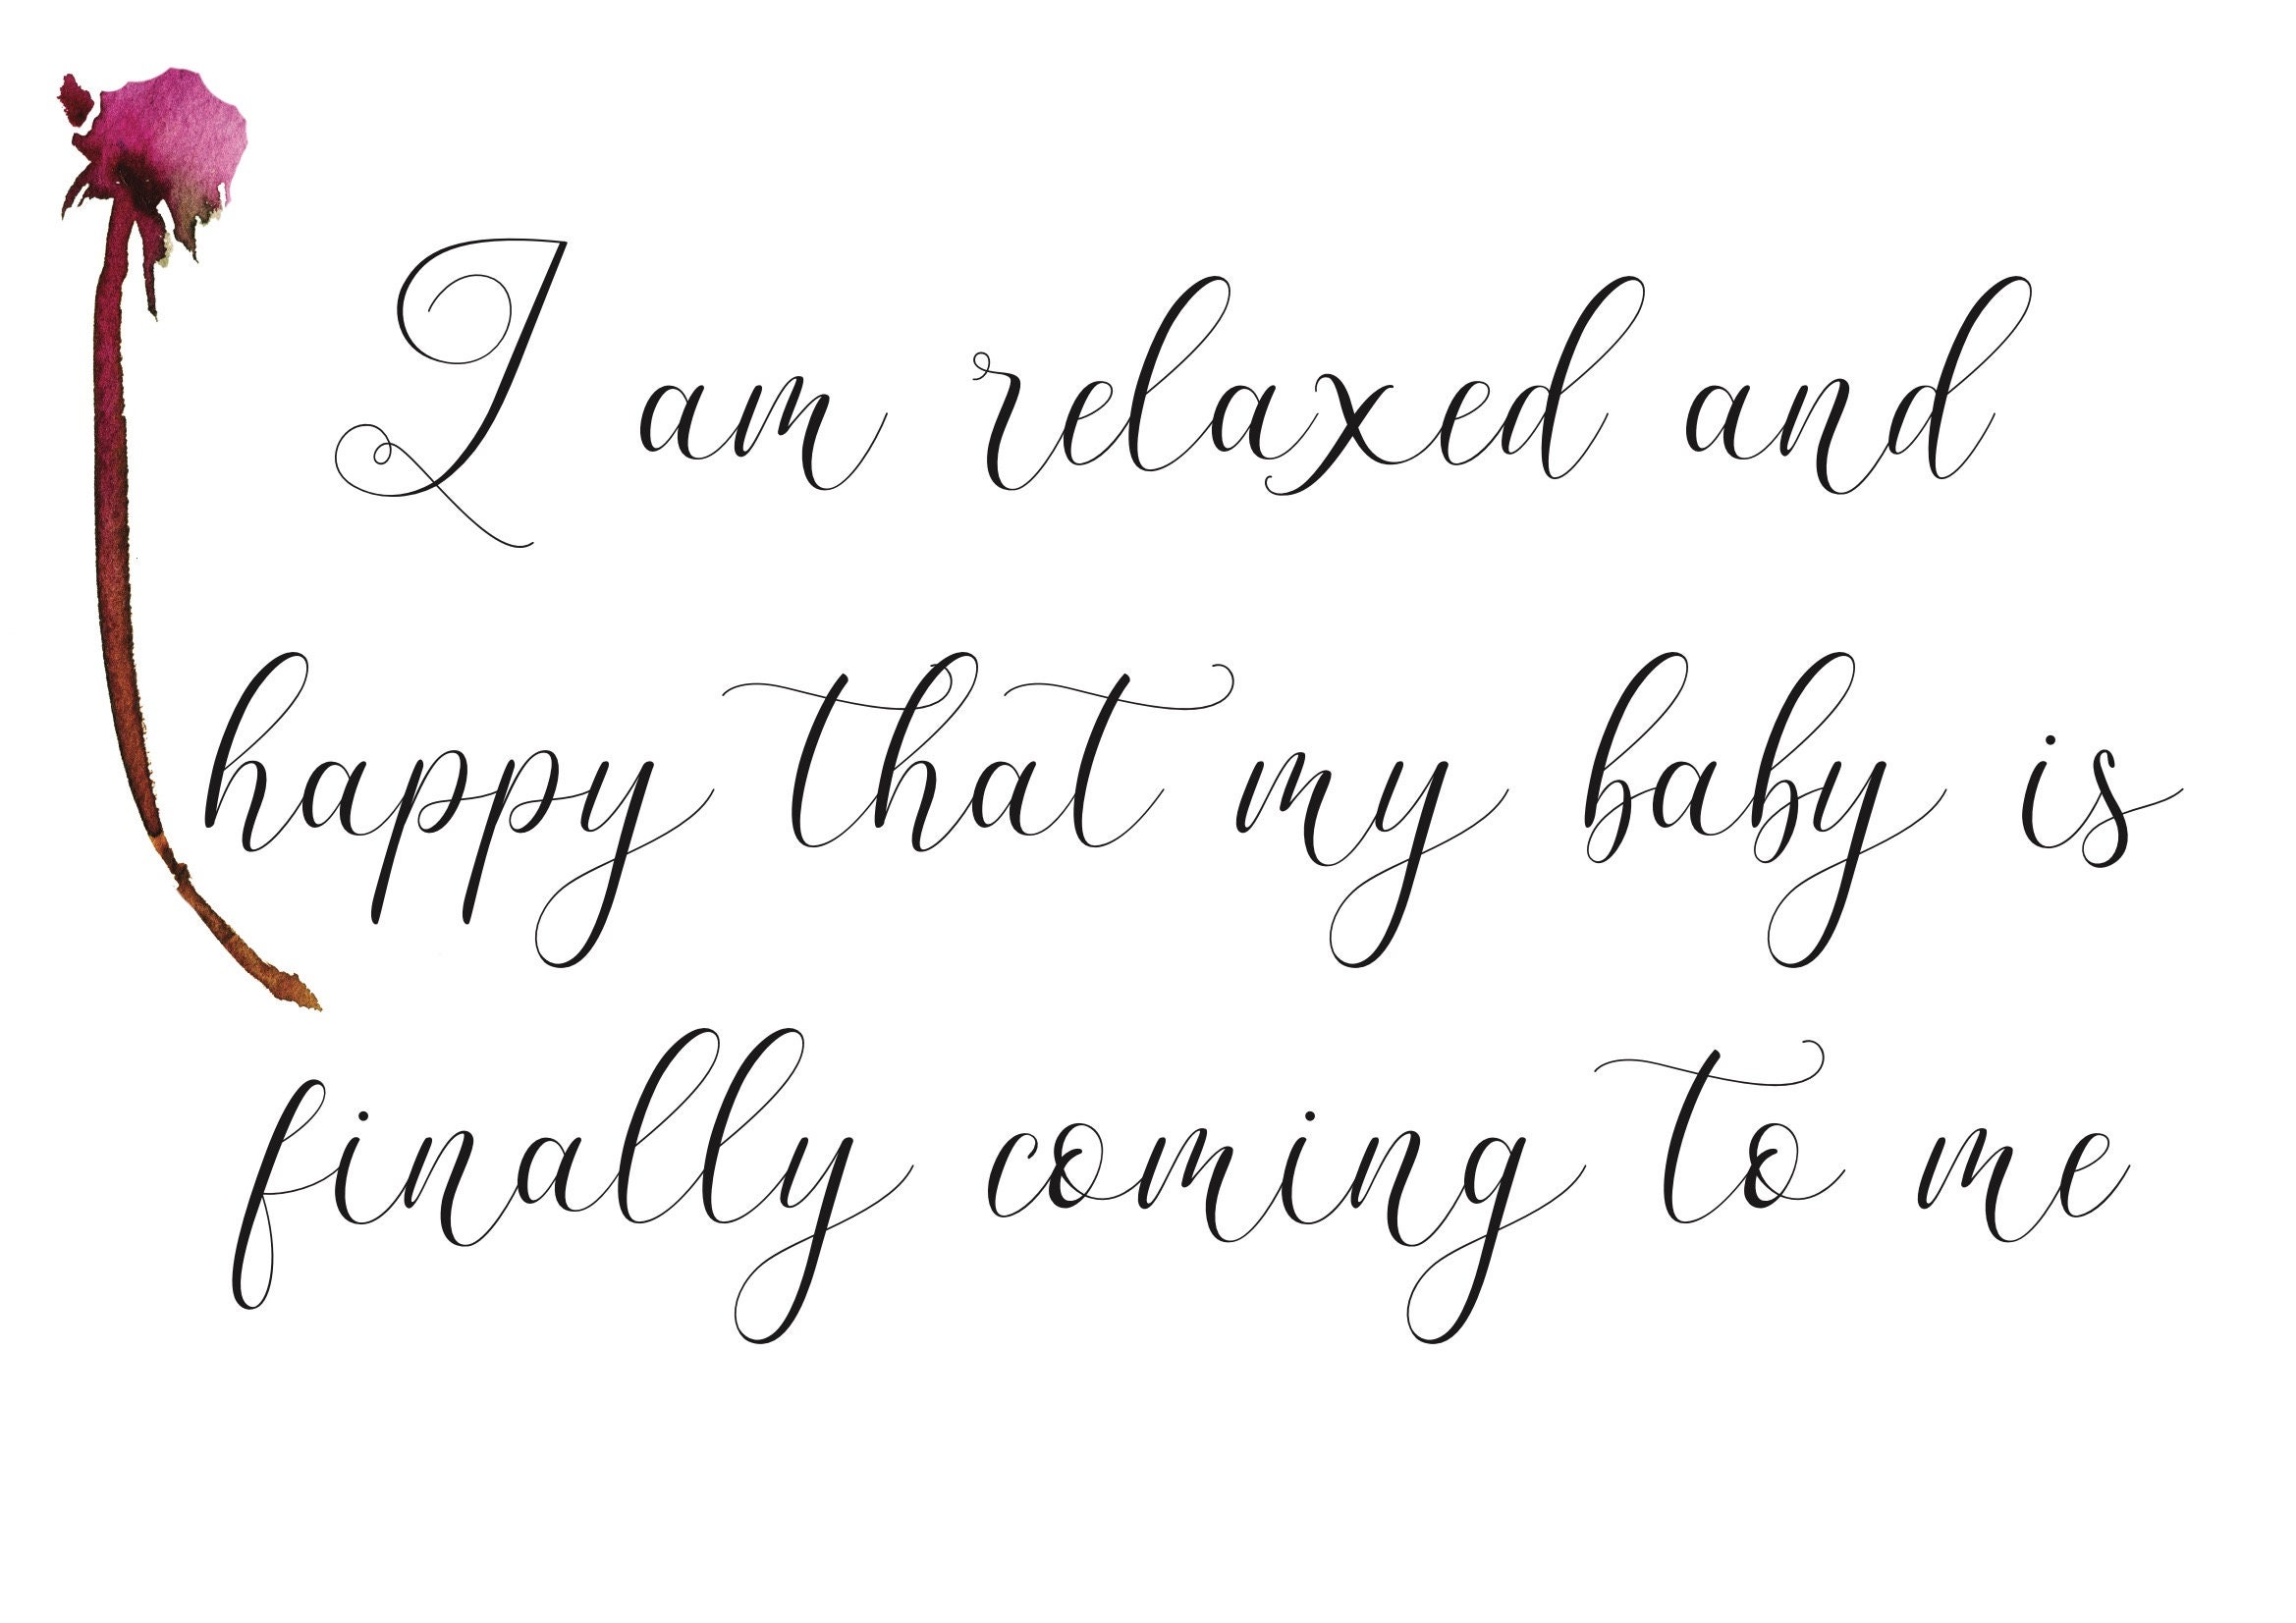 Birth Affirmation Printable Download Cards: Petal Power White | Etsy